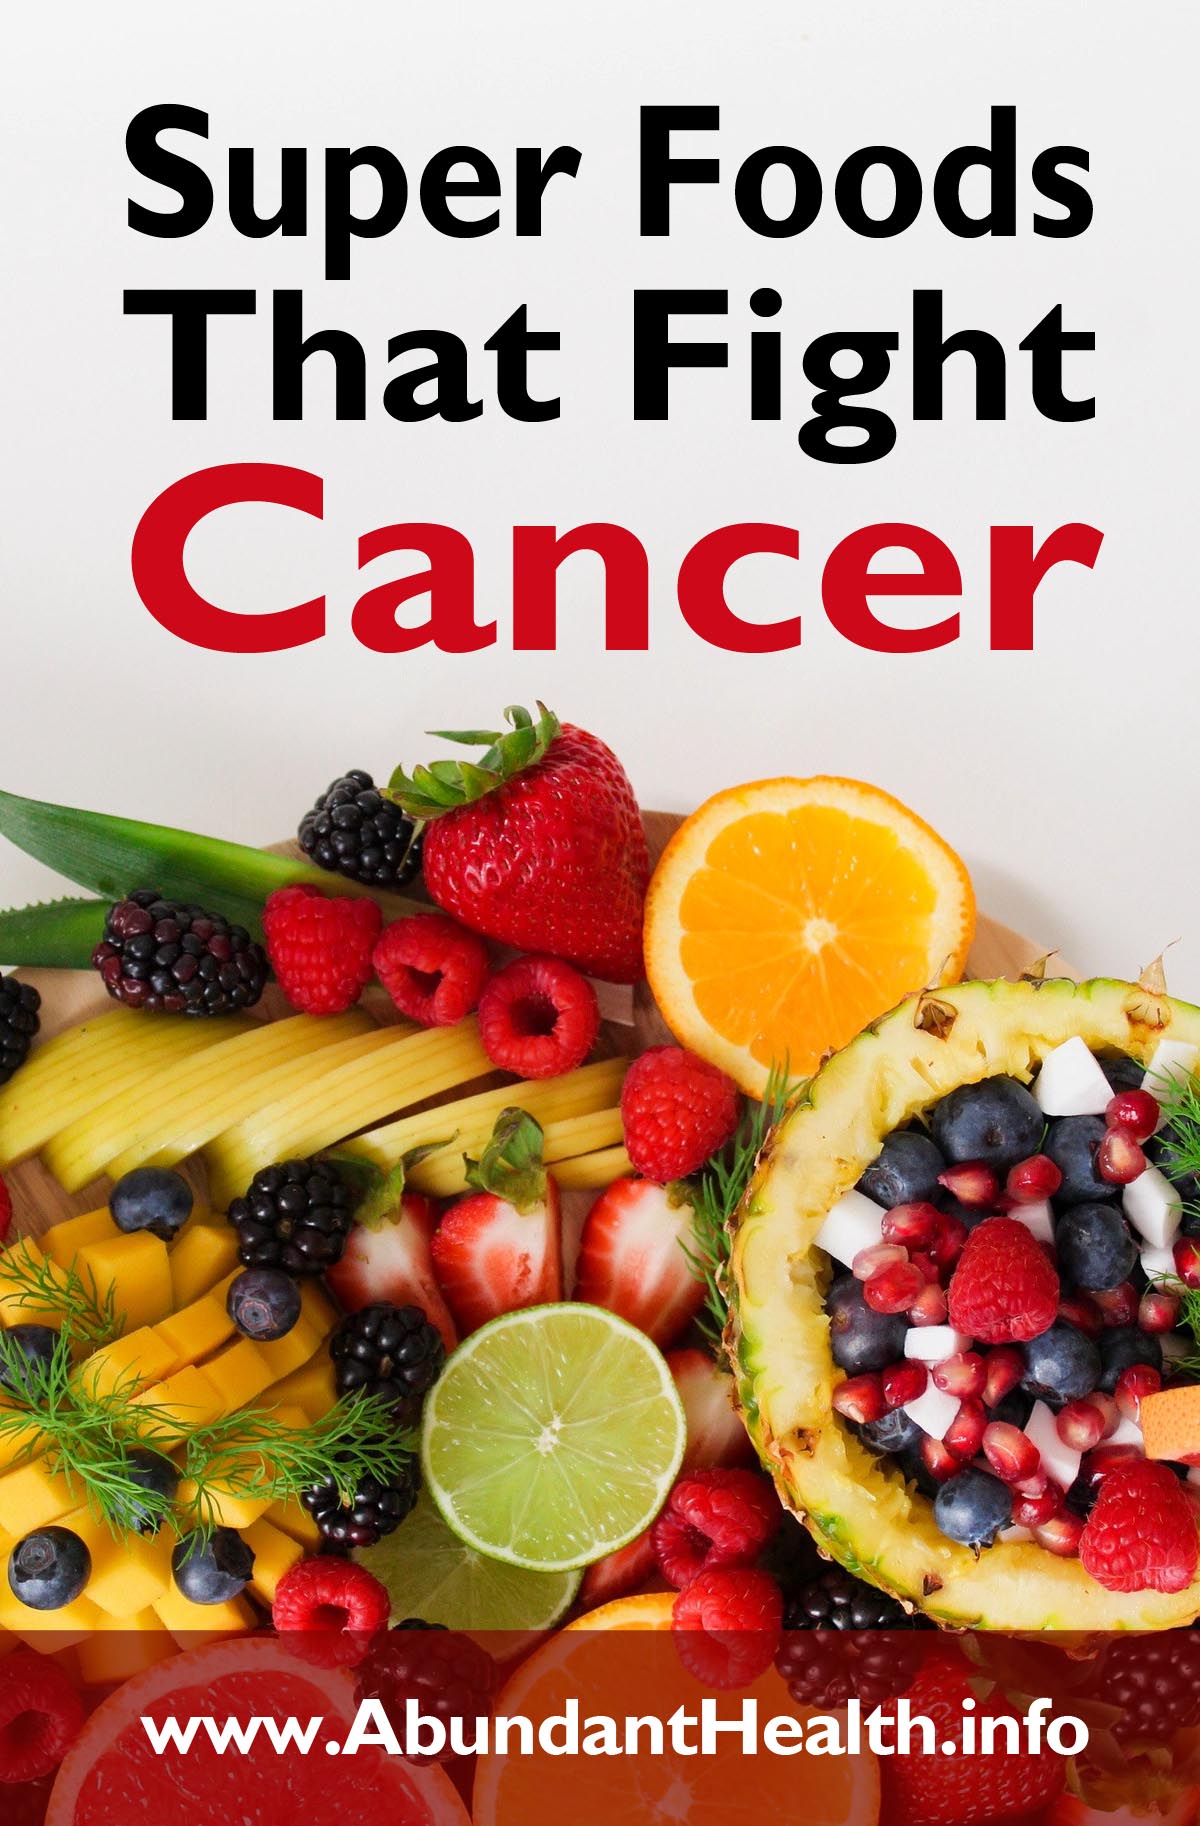 Super Foods That Fight Cancer